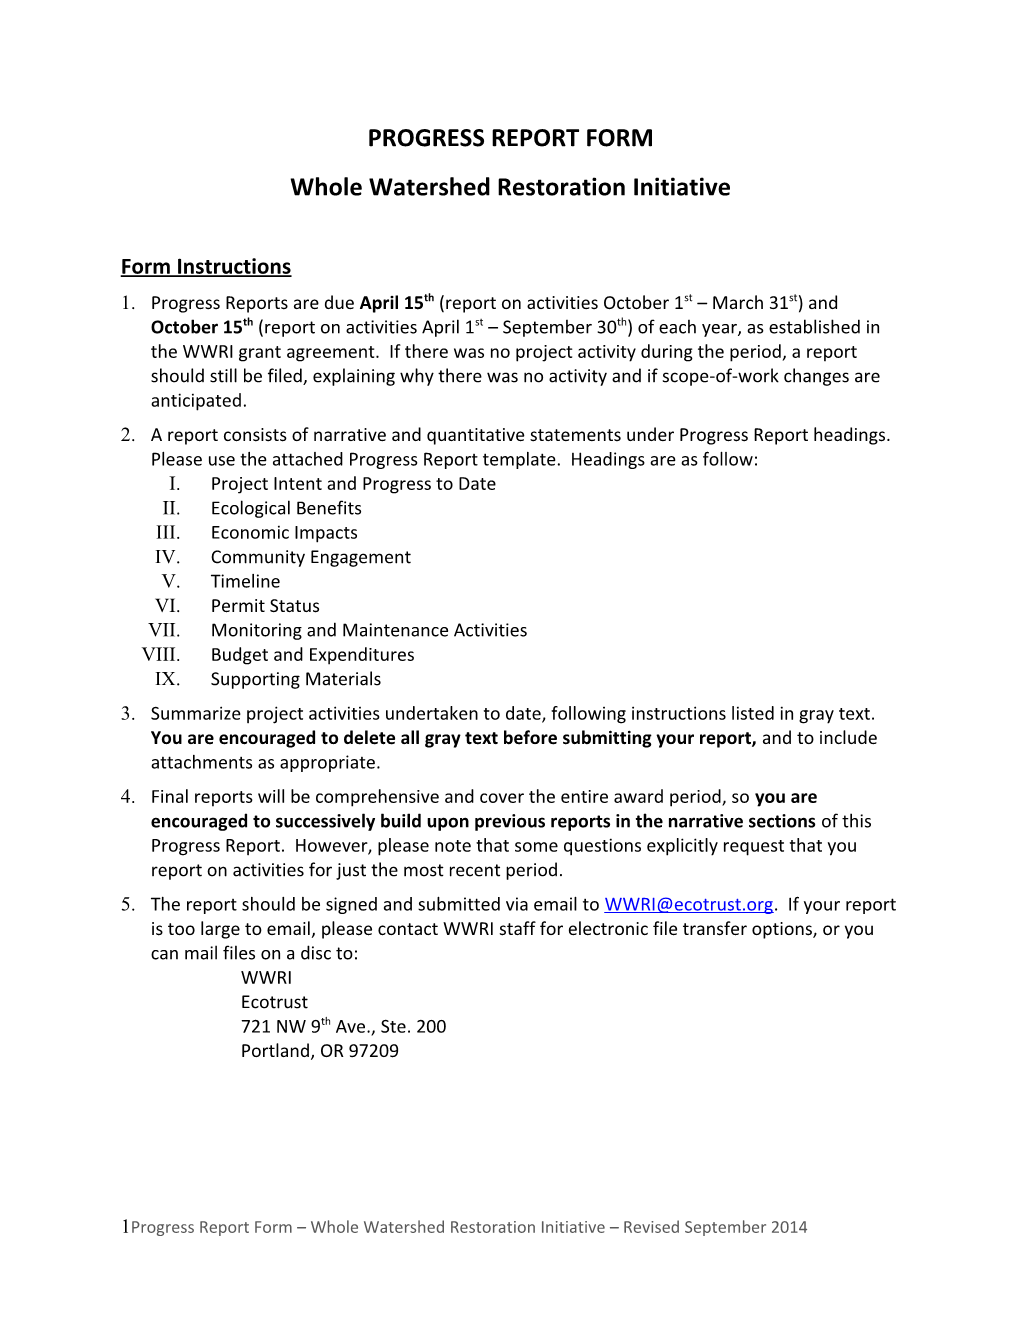 Whole Watershed Restoration Initiative